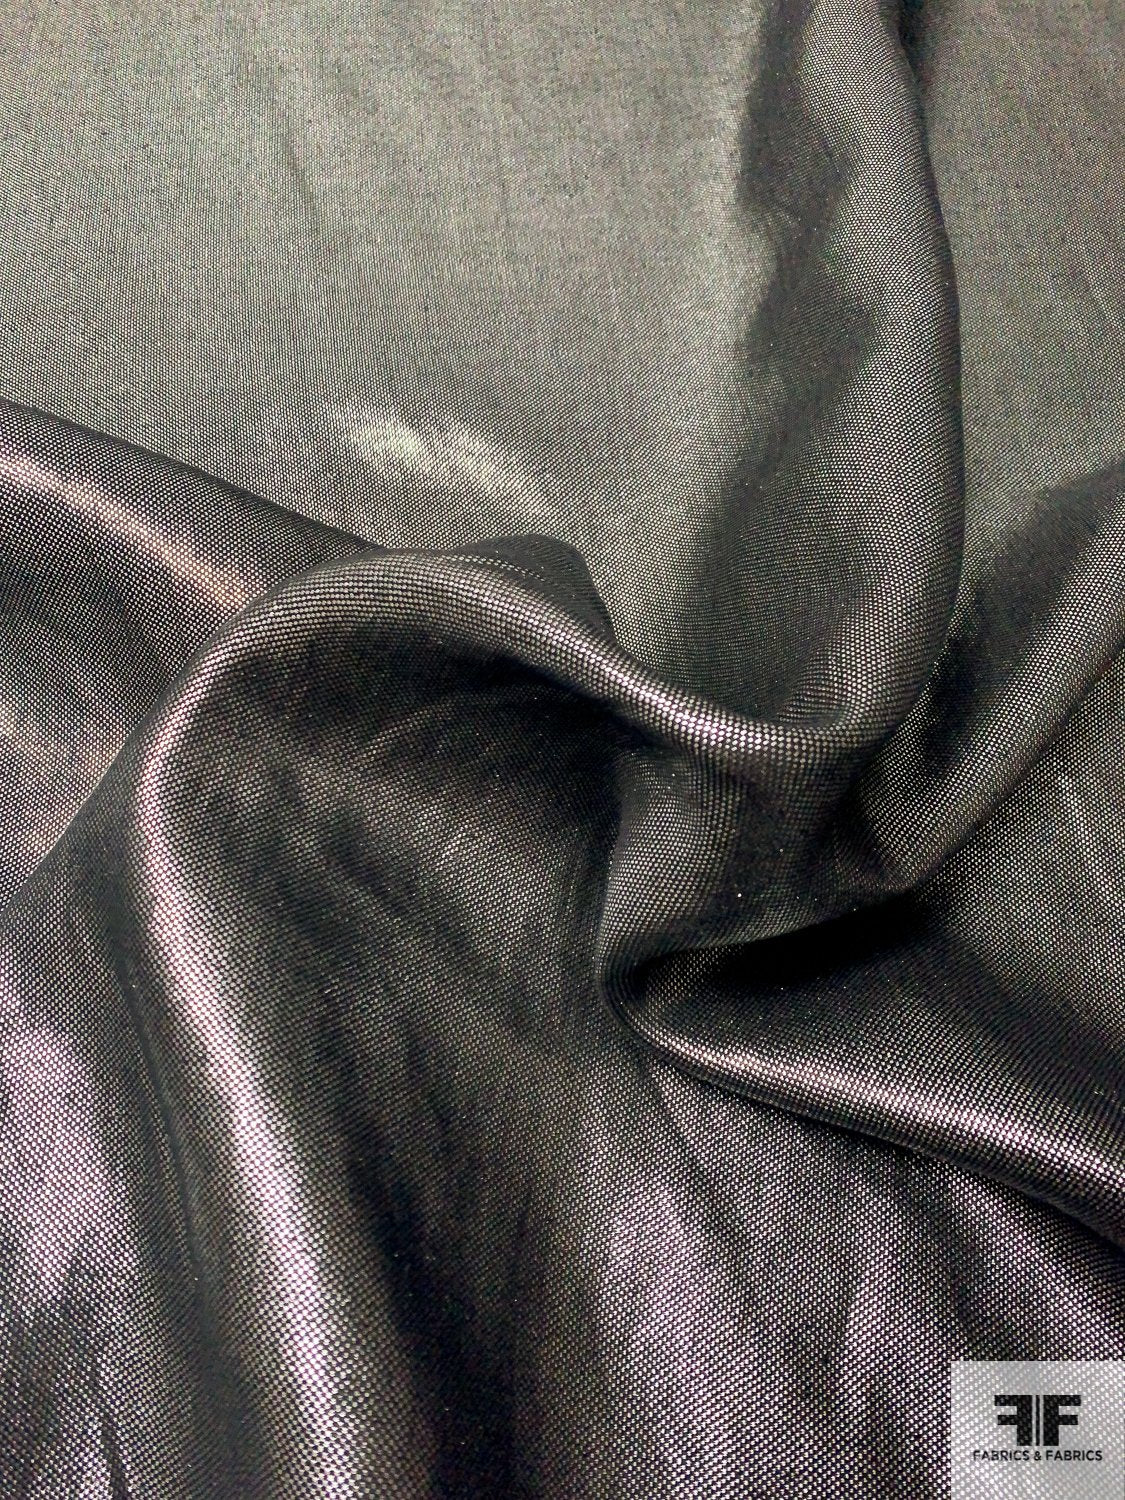  Faux Patent Leather Silver, Fabric by the Yard